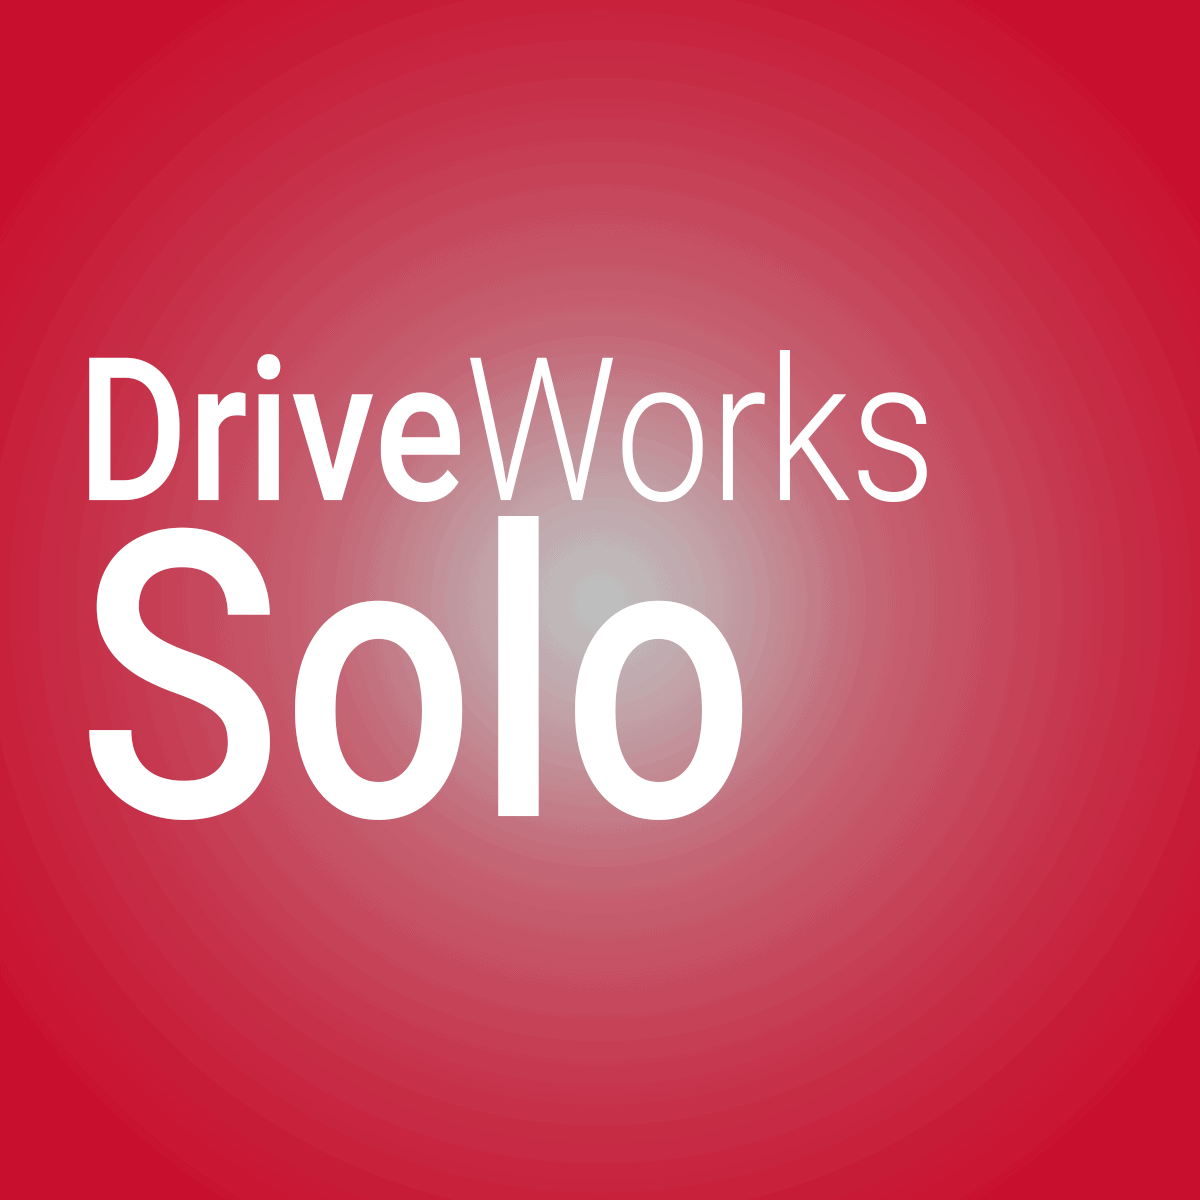 DriveWorks Solo is the second step in the DriveWorks tool ladder